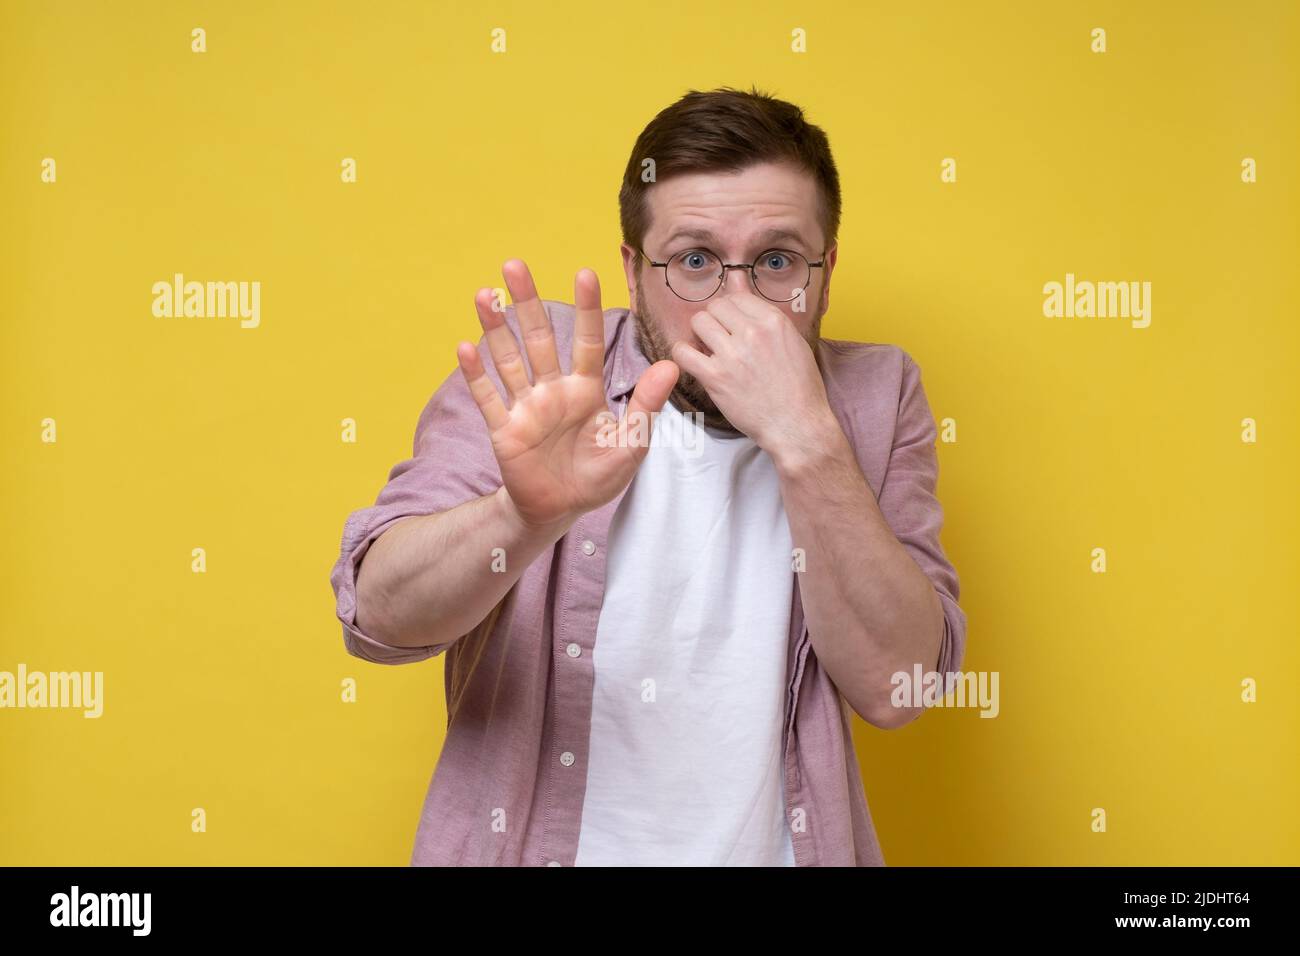 Young man smells an unpleasant smell, he pinches nose with fingers and makes a stop gesture with hand. Yellow background. Stock Photo